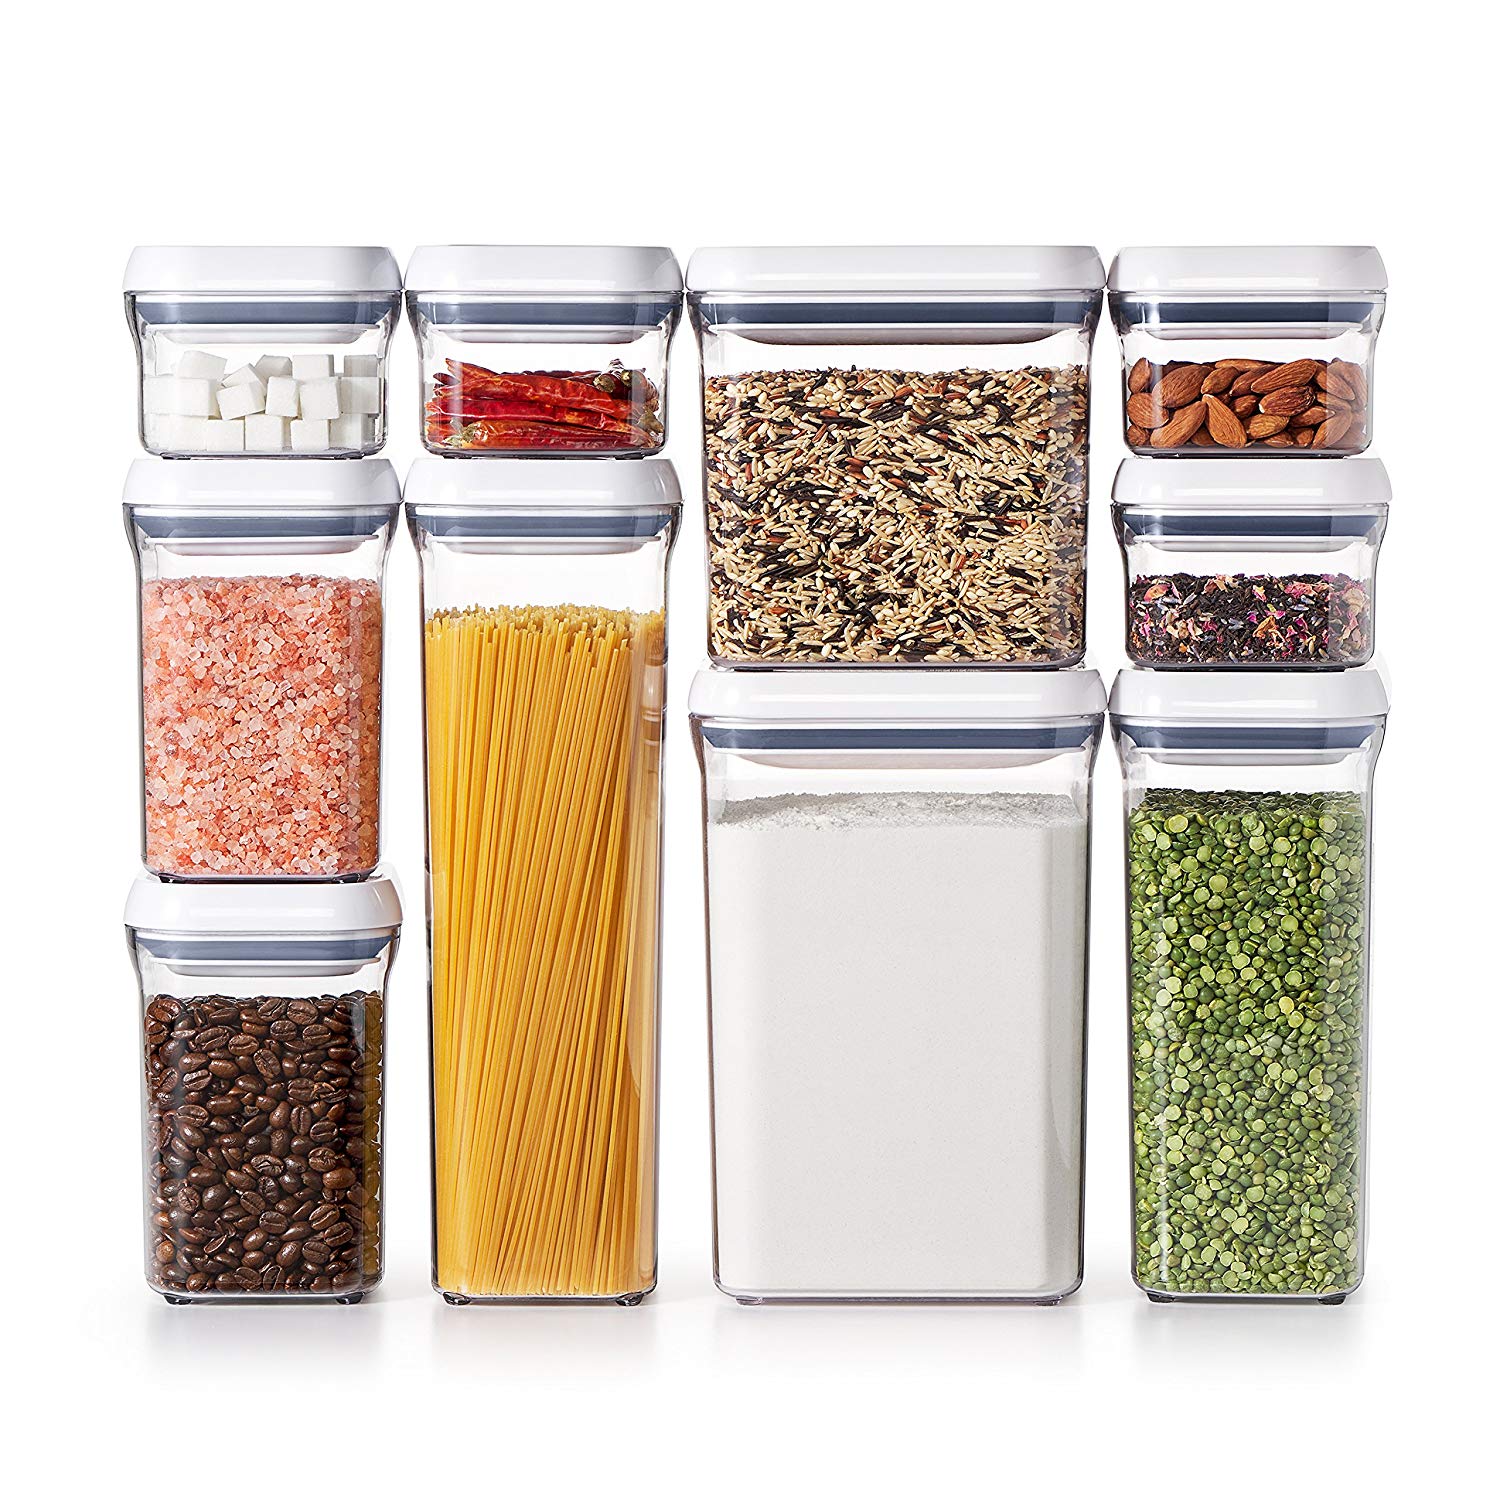 OXO Good Grips 2.5 Qt. POP Food Storage Container with Airtight